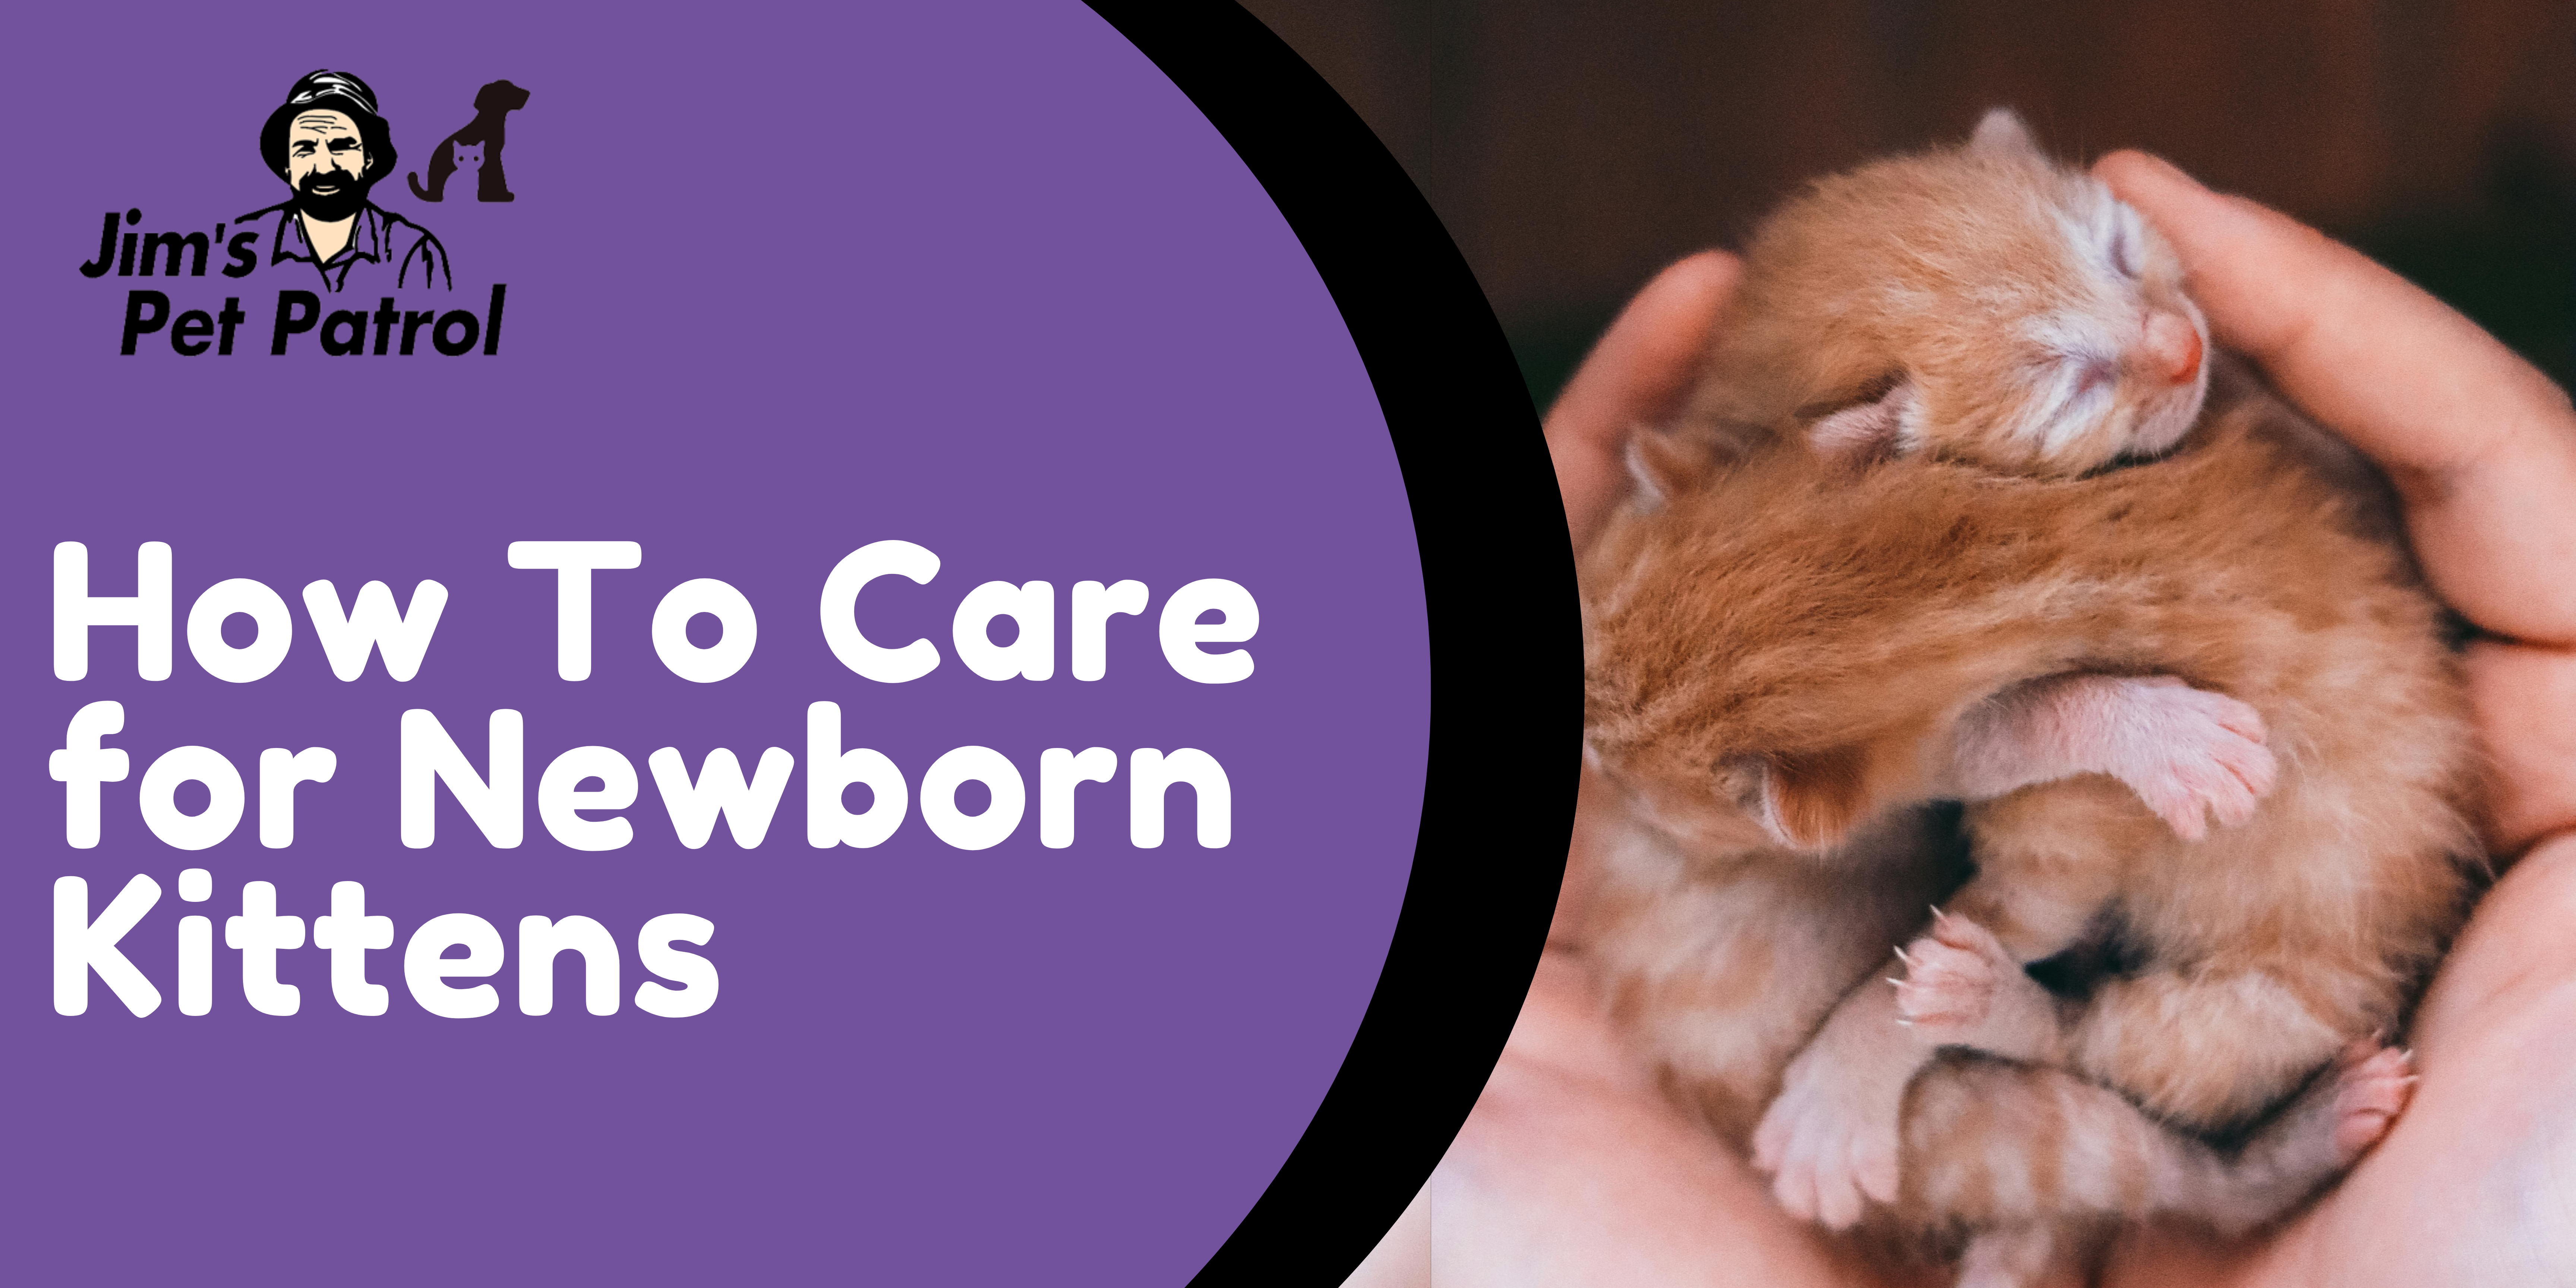 How To Care for Newborn Kittens